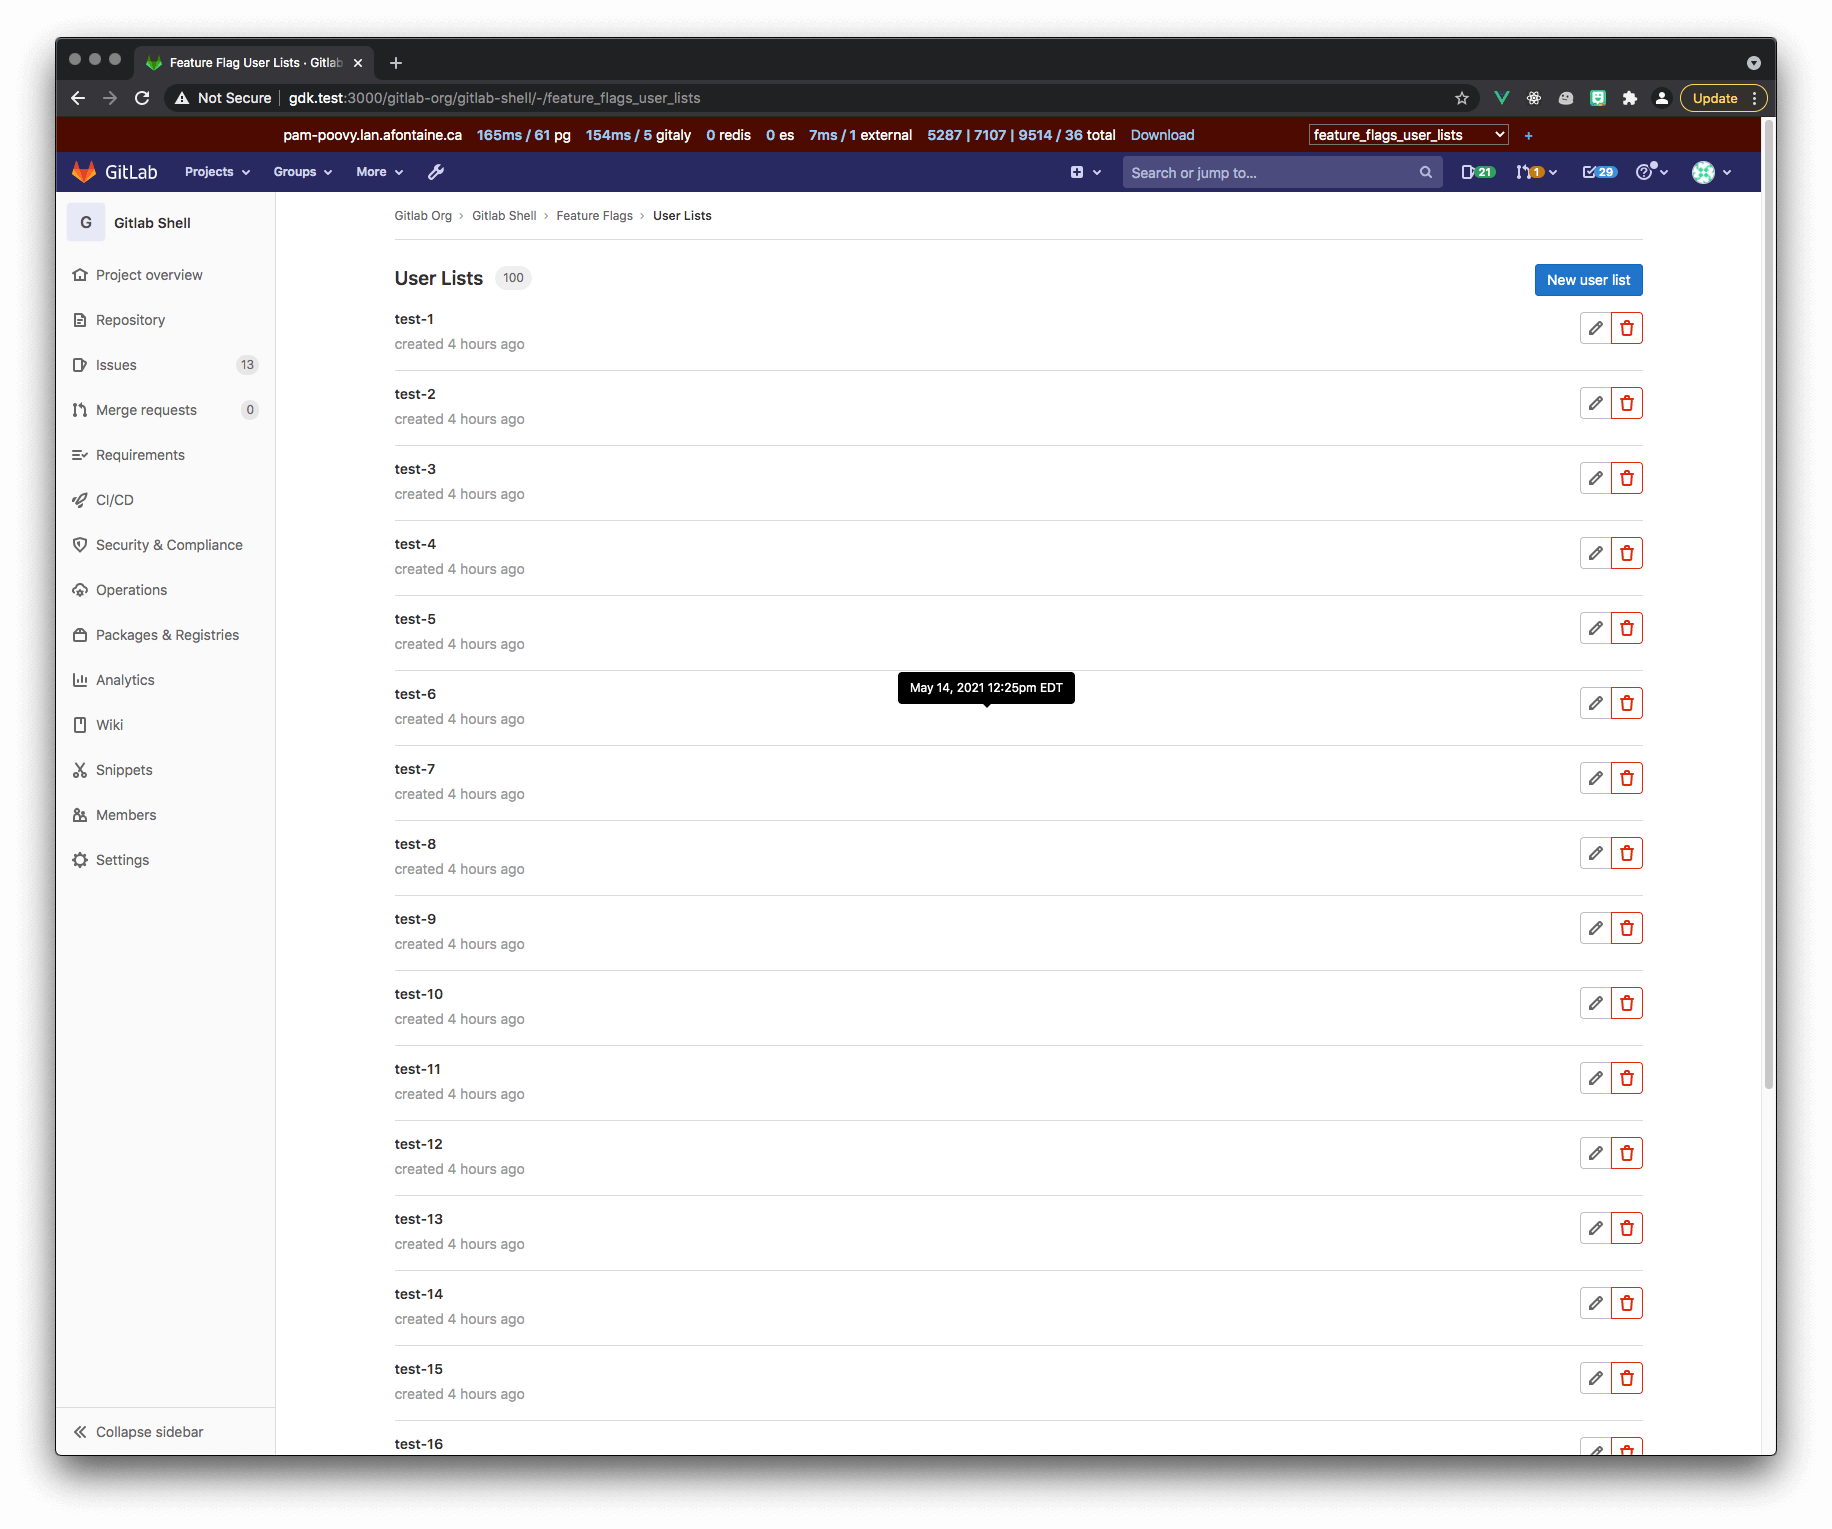 Feature Flags User List is now on its own page